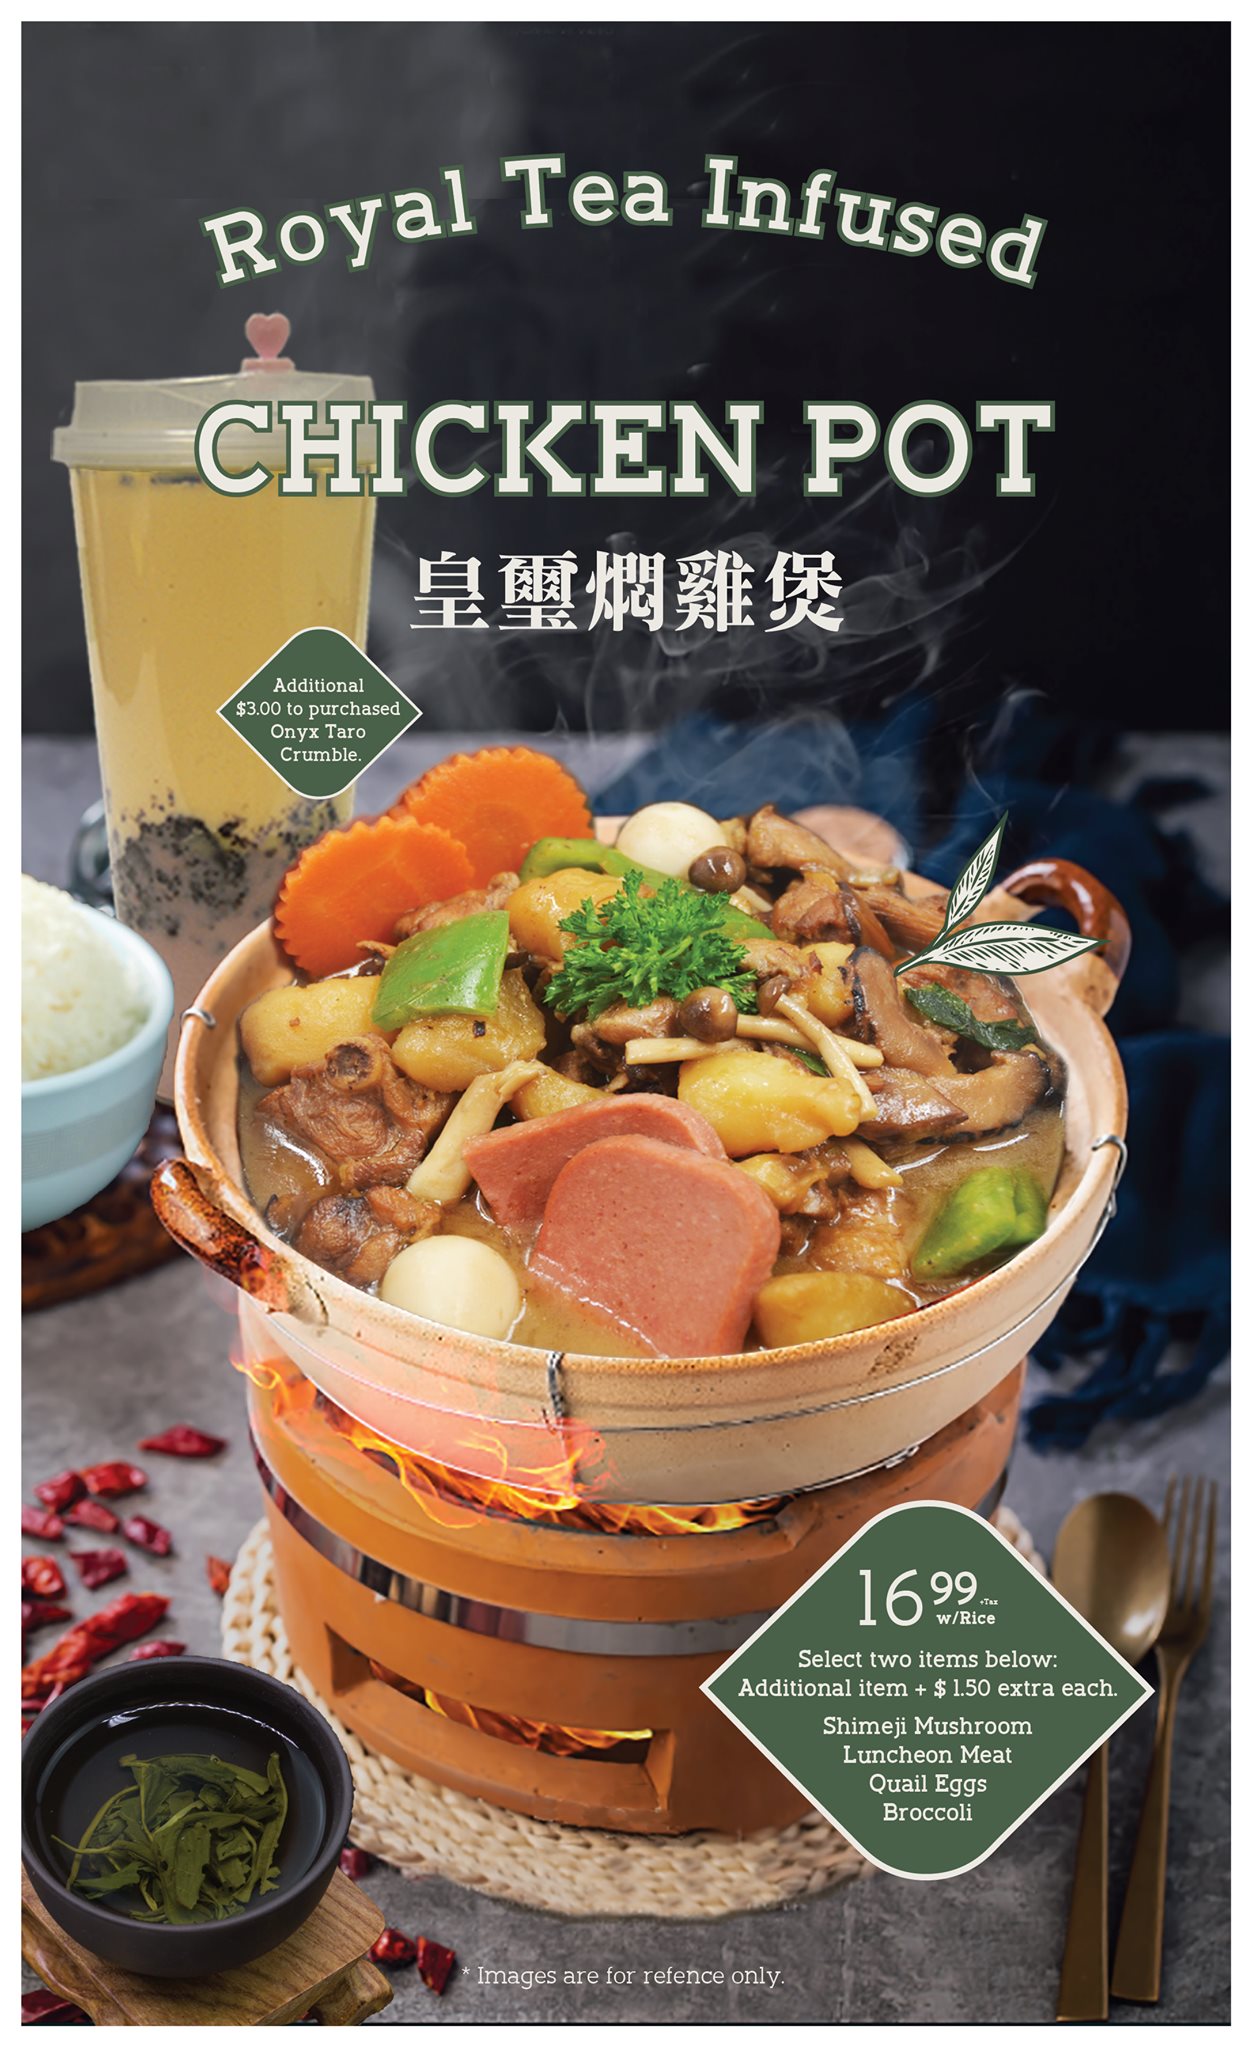 Royal Tea Infused Chicken Pot